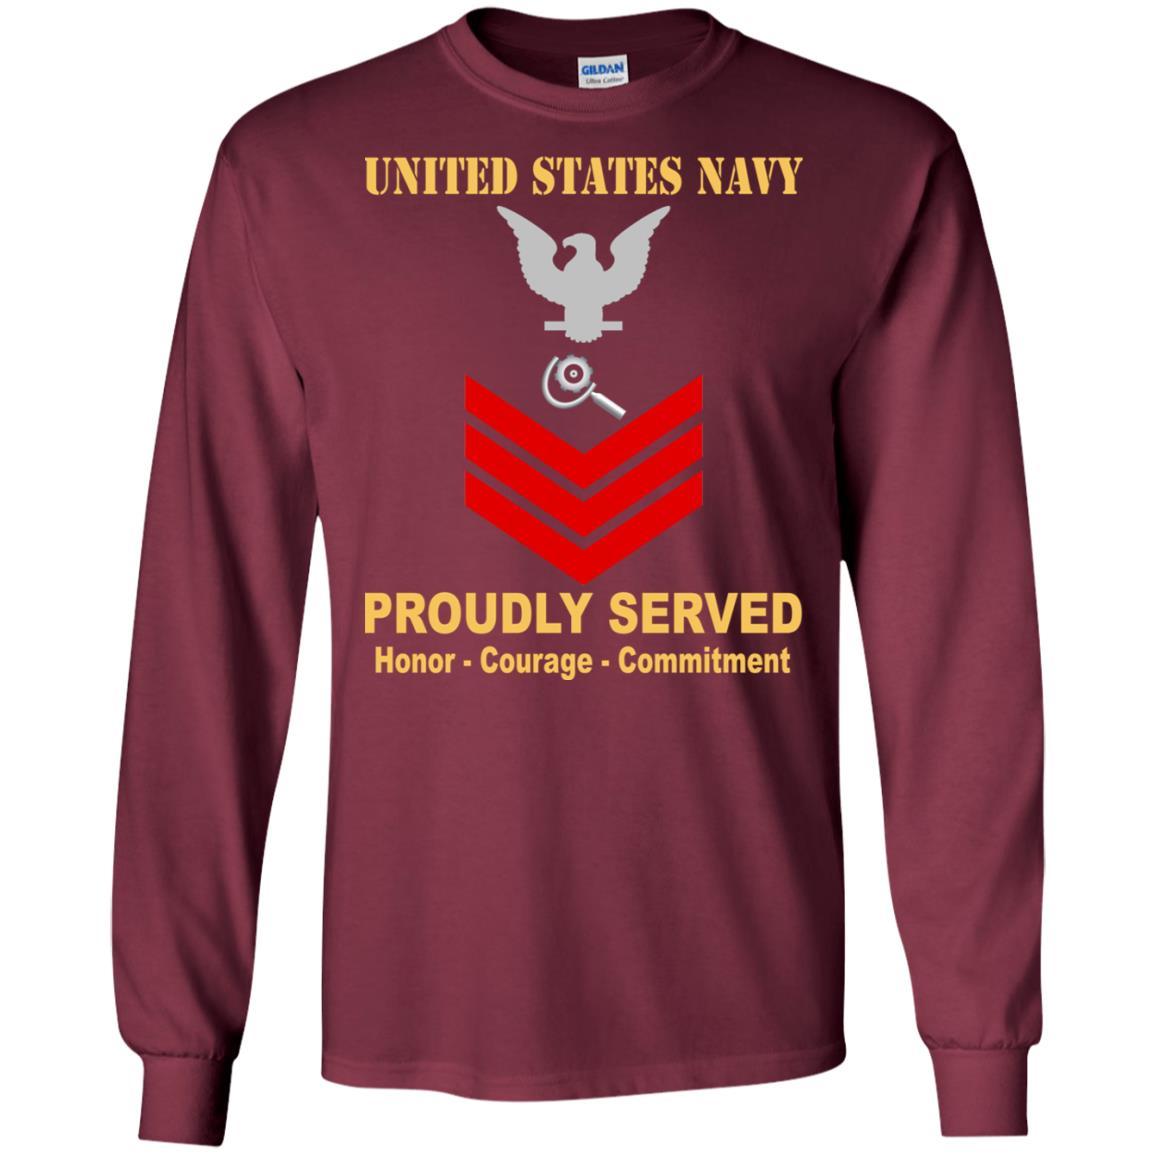 U.S Navy Machinery repairman Navy MR E-6 Rating Badges Proudly Served T-Shirt For Men On Front-TShirt-Navy-Veterans Nation